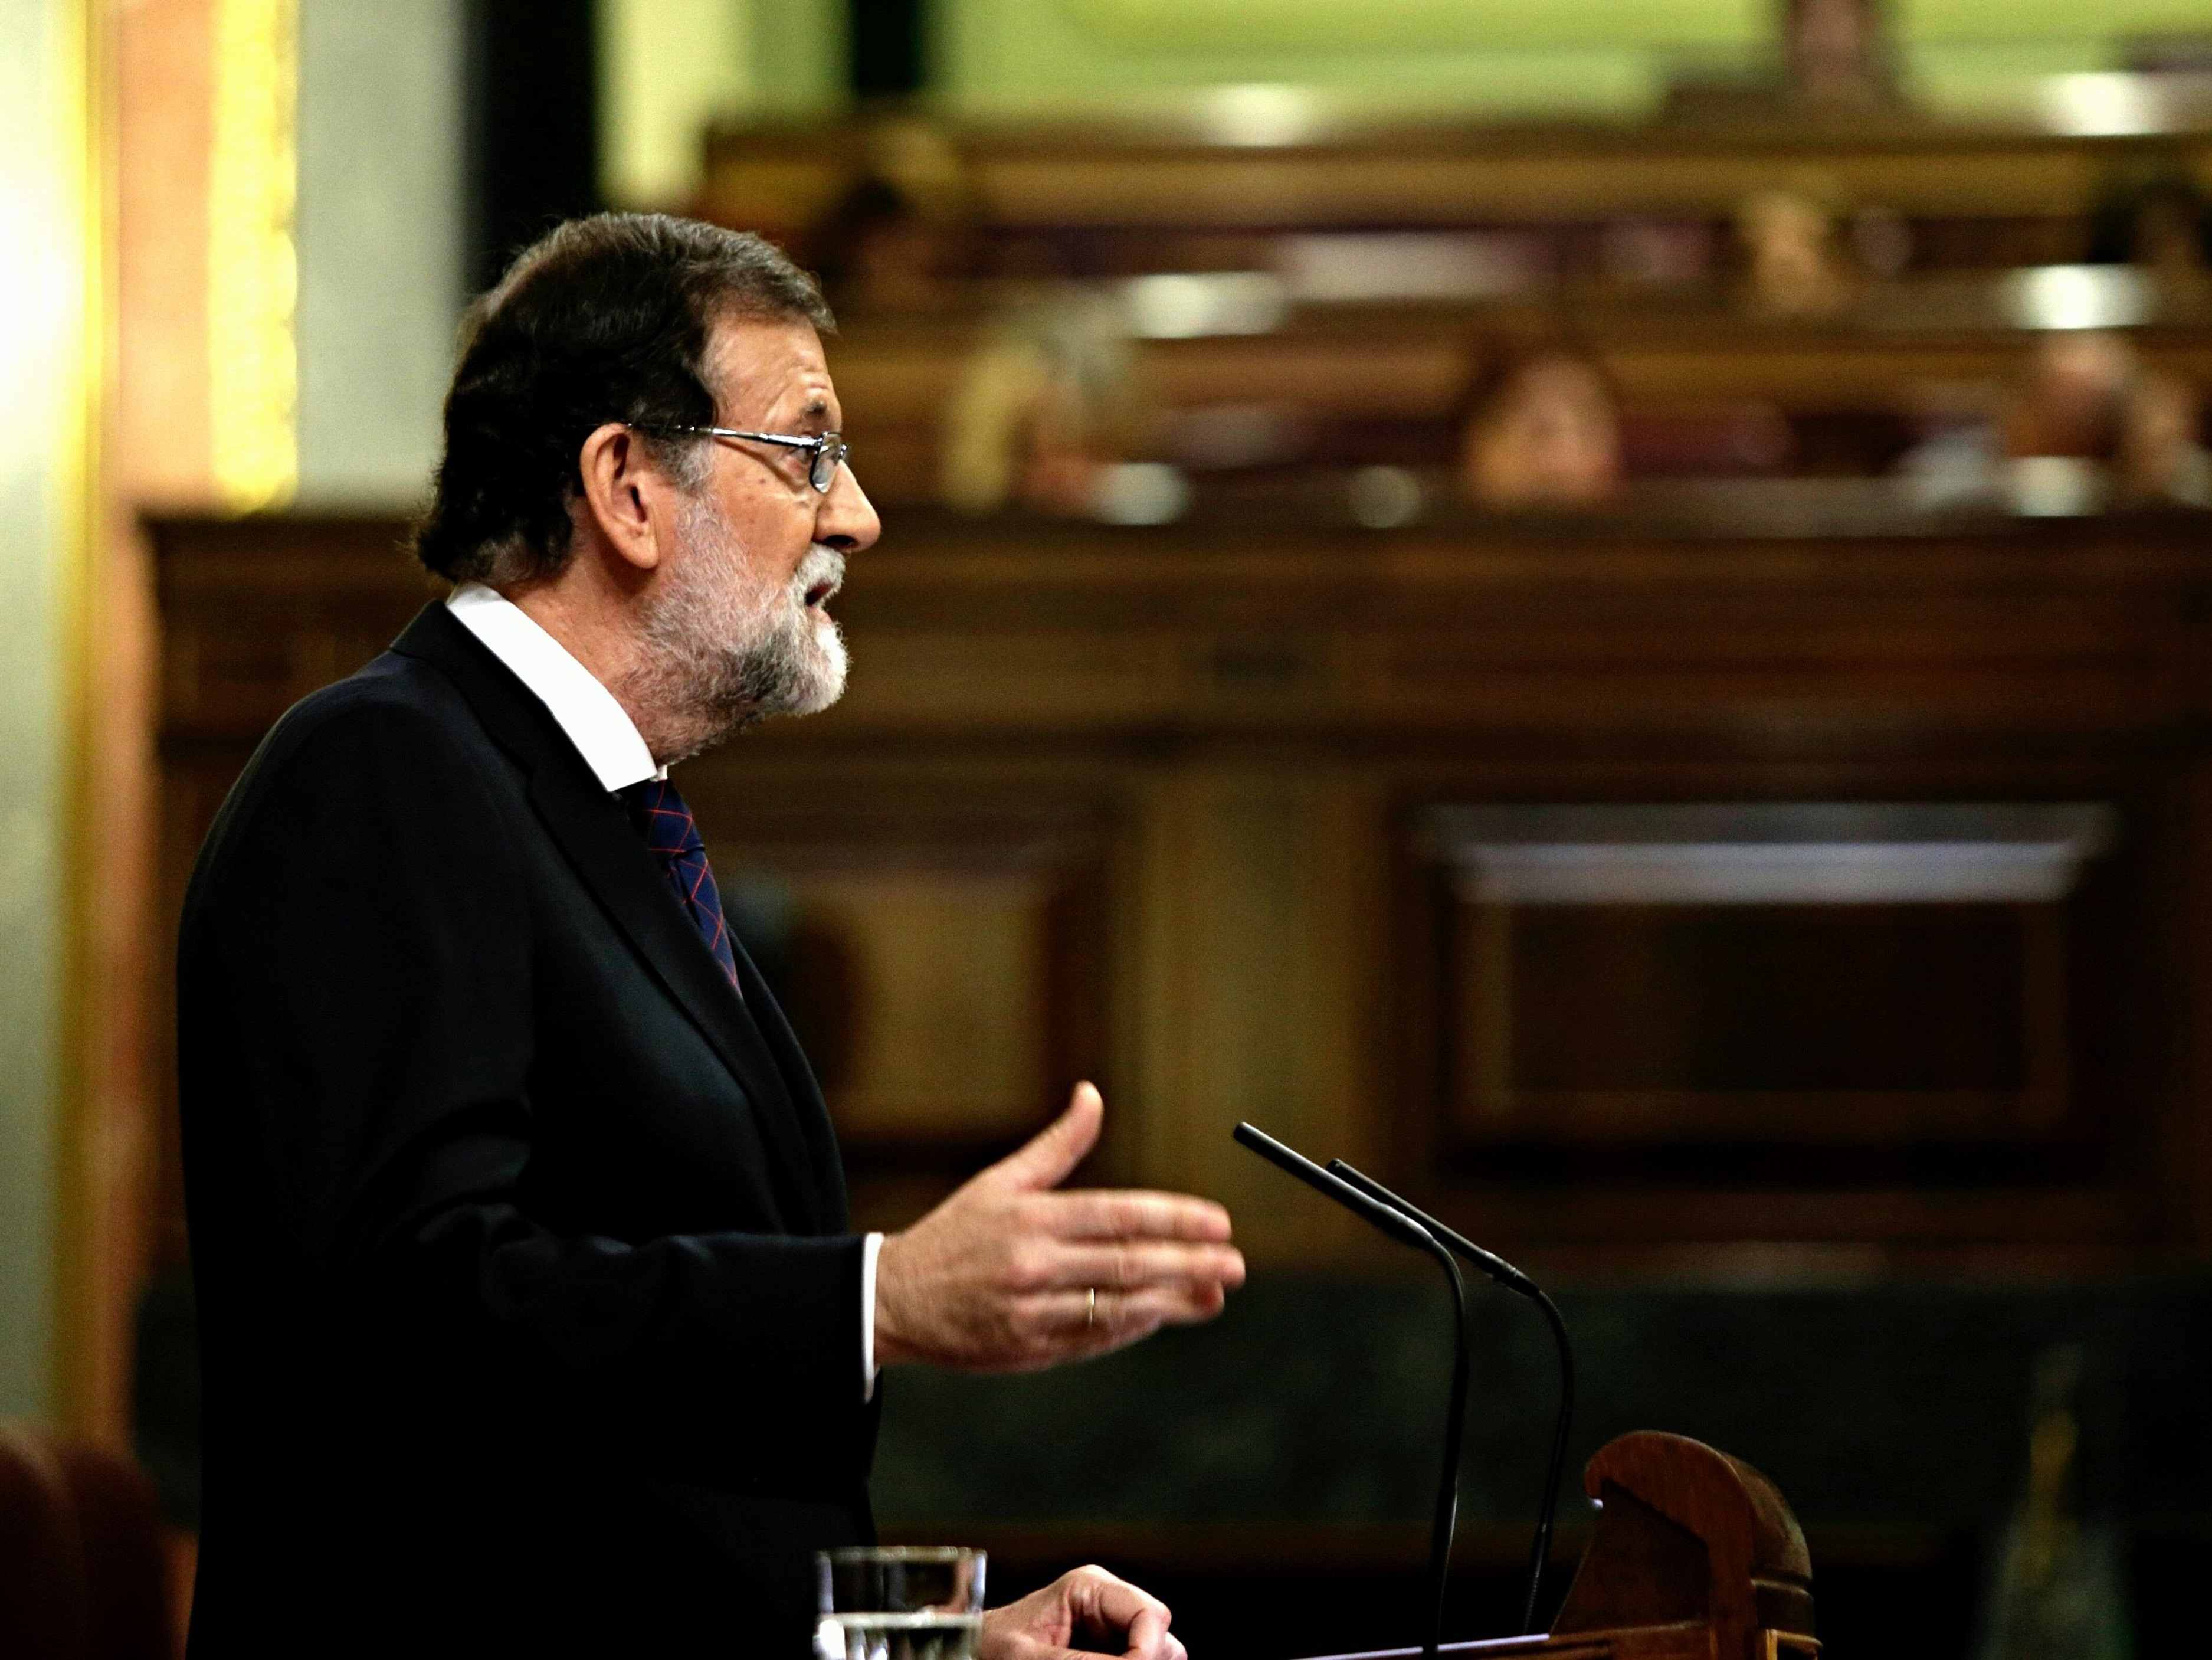 Spanish president Mariano Rajoy speaking in front of Parliament on Wednesday (by ACN)